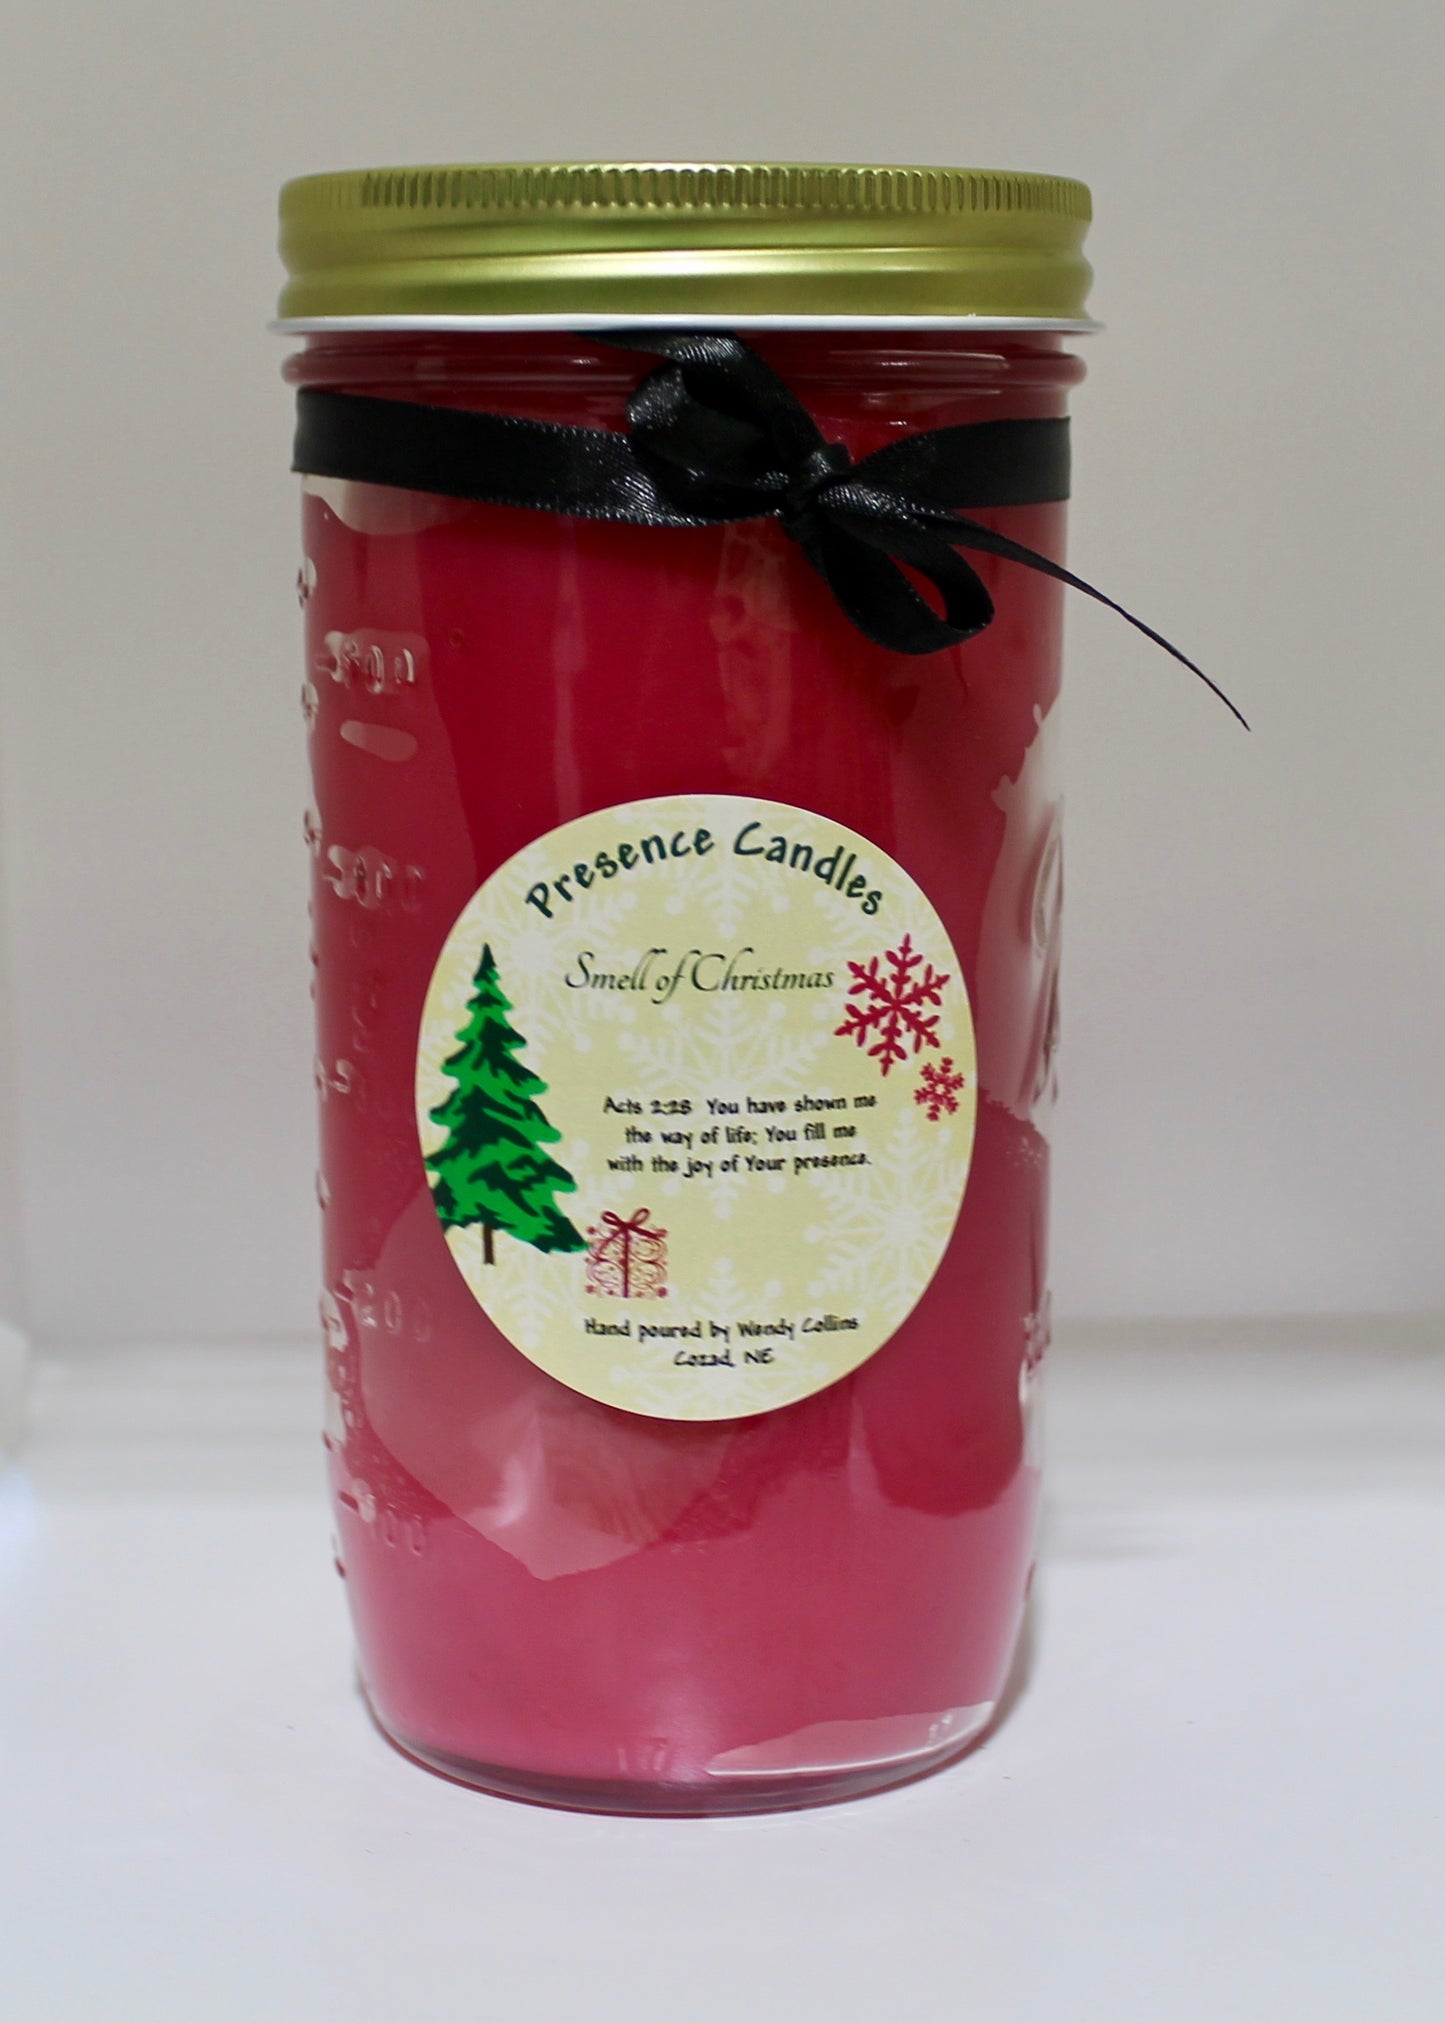 Yuletide Spice Scented Candle